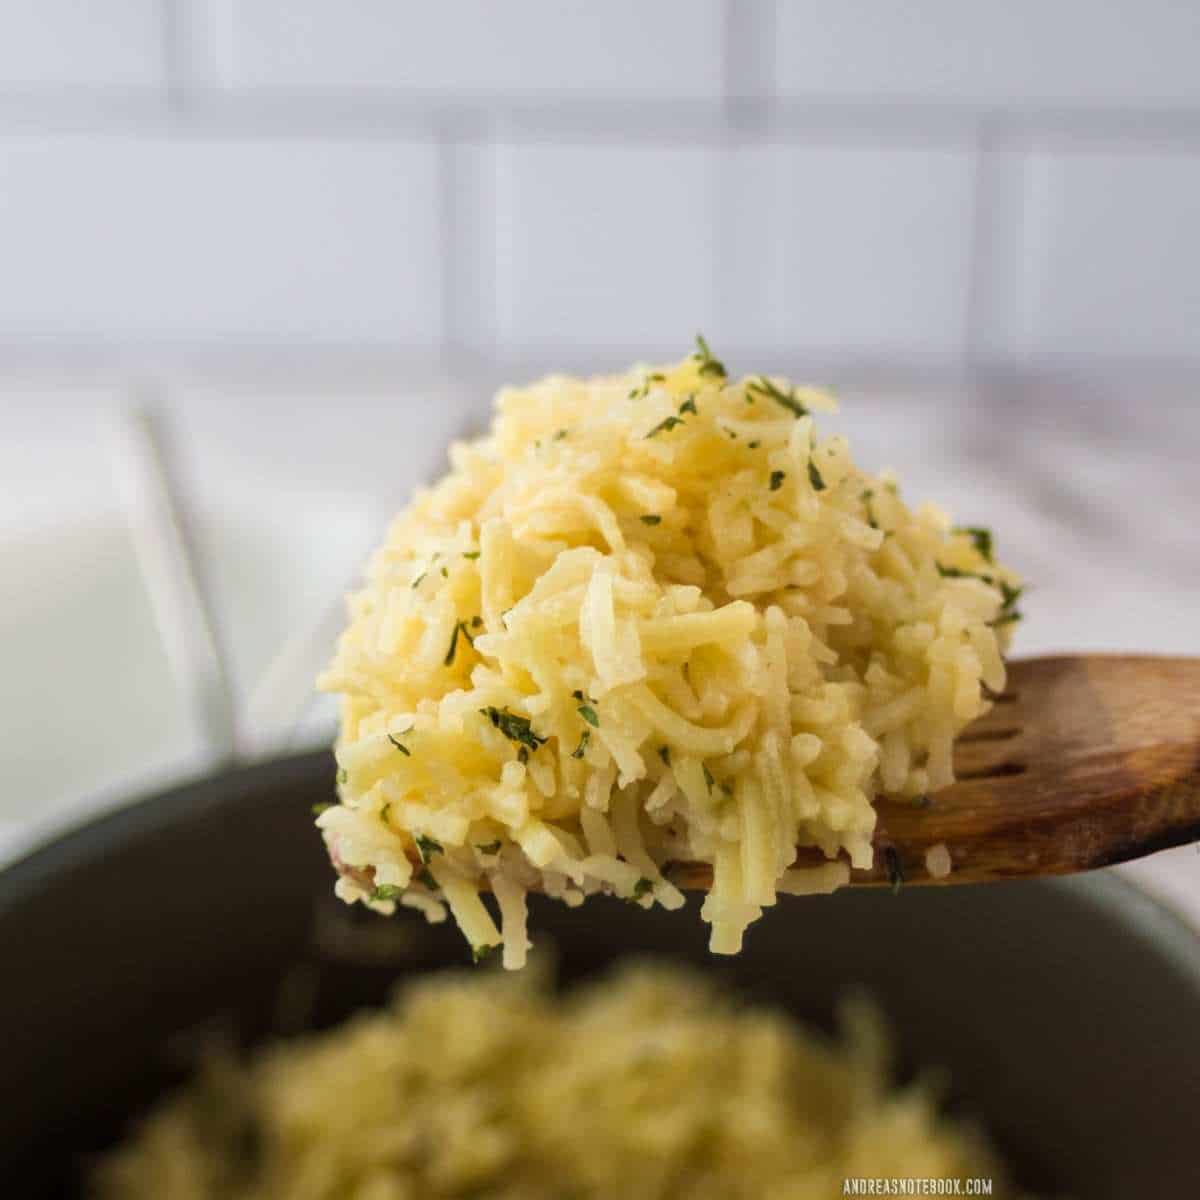 wooden spoon full of yellow rice-a-roni copycat rice with blurred black pot with rice in background